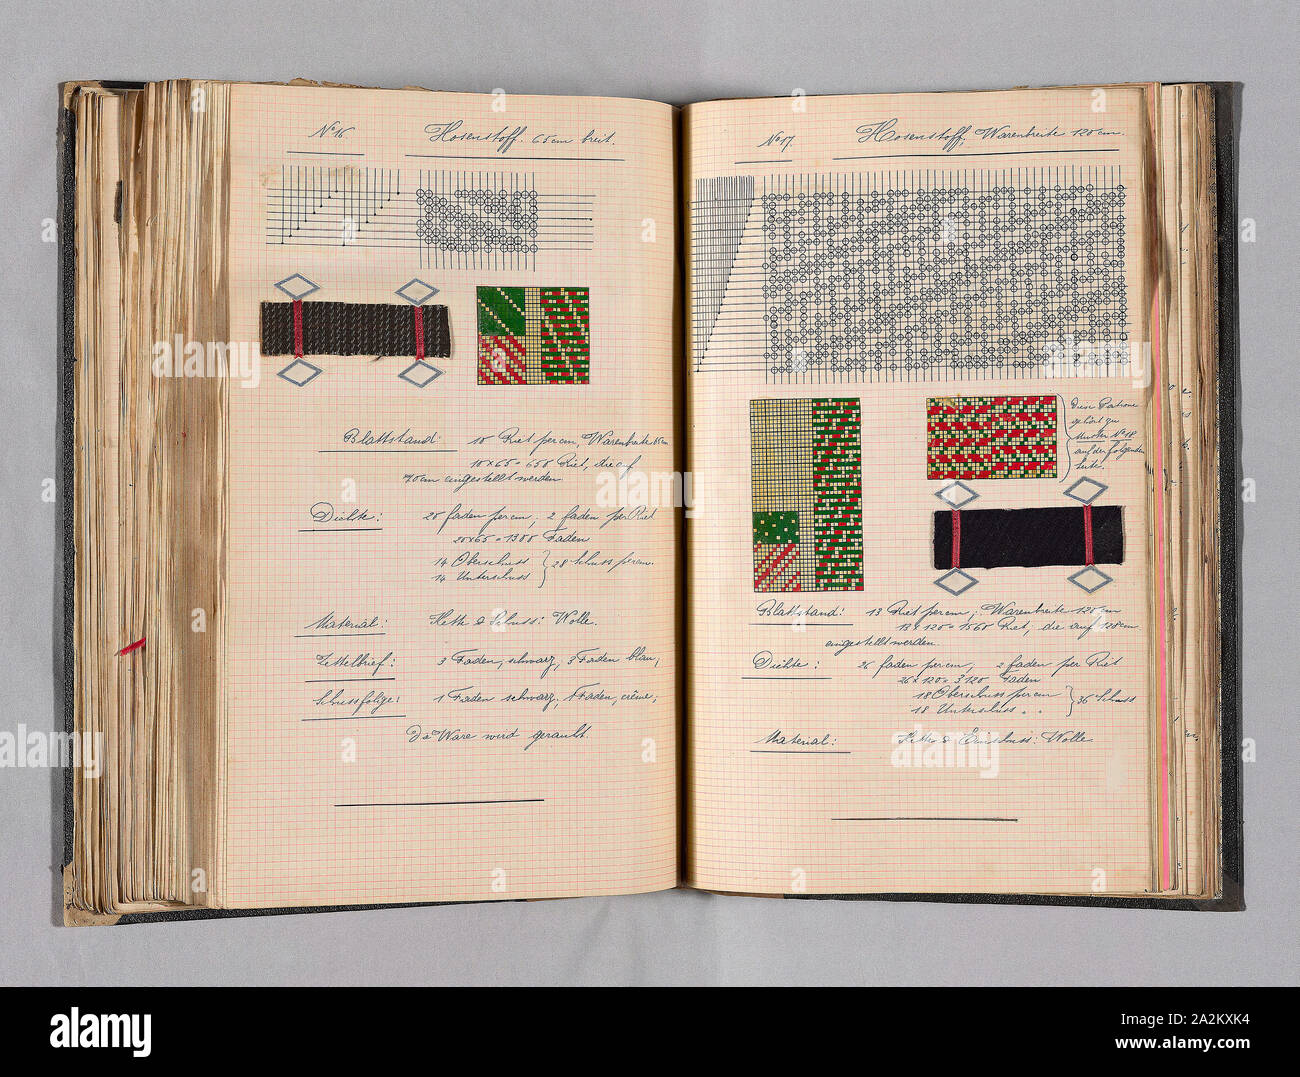 Student Notebook Containing Notes, Diagrams and Swatches, c. 1898–1900, Alfred Fehr (Switzerland, 1879-1955), Germany, Bound notebook of technical notes and weave samples: fabrics for clothing and mixed goods, ribbed and twill cottons, and jacquard, 176 pages, 38.7 x 27.3 x 6.7 cm (15 1/4 x 10 3/4 x 2 5/8 in Stock Photo